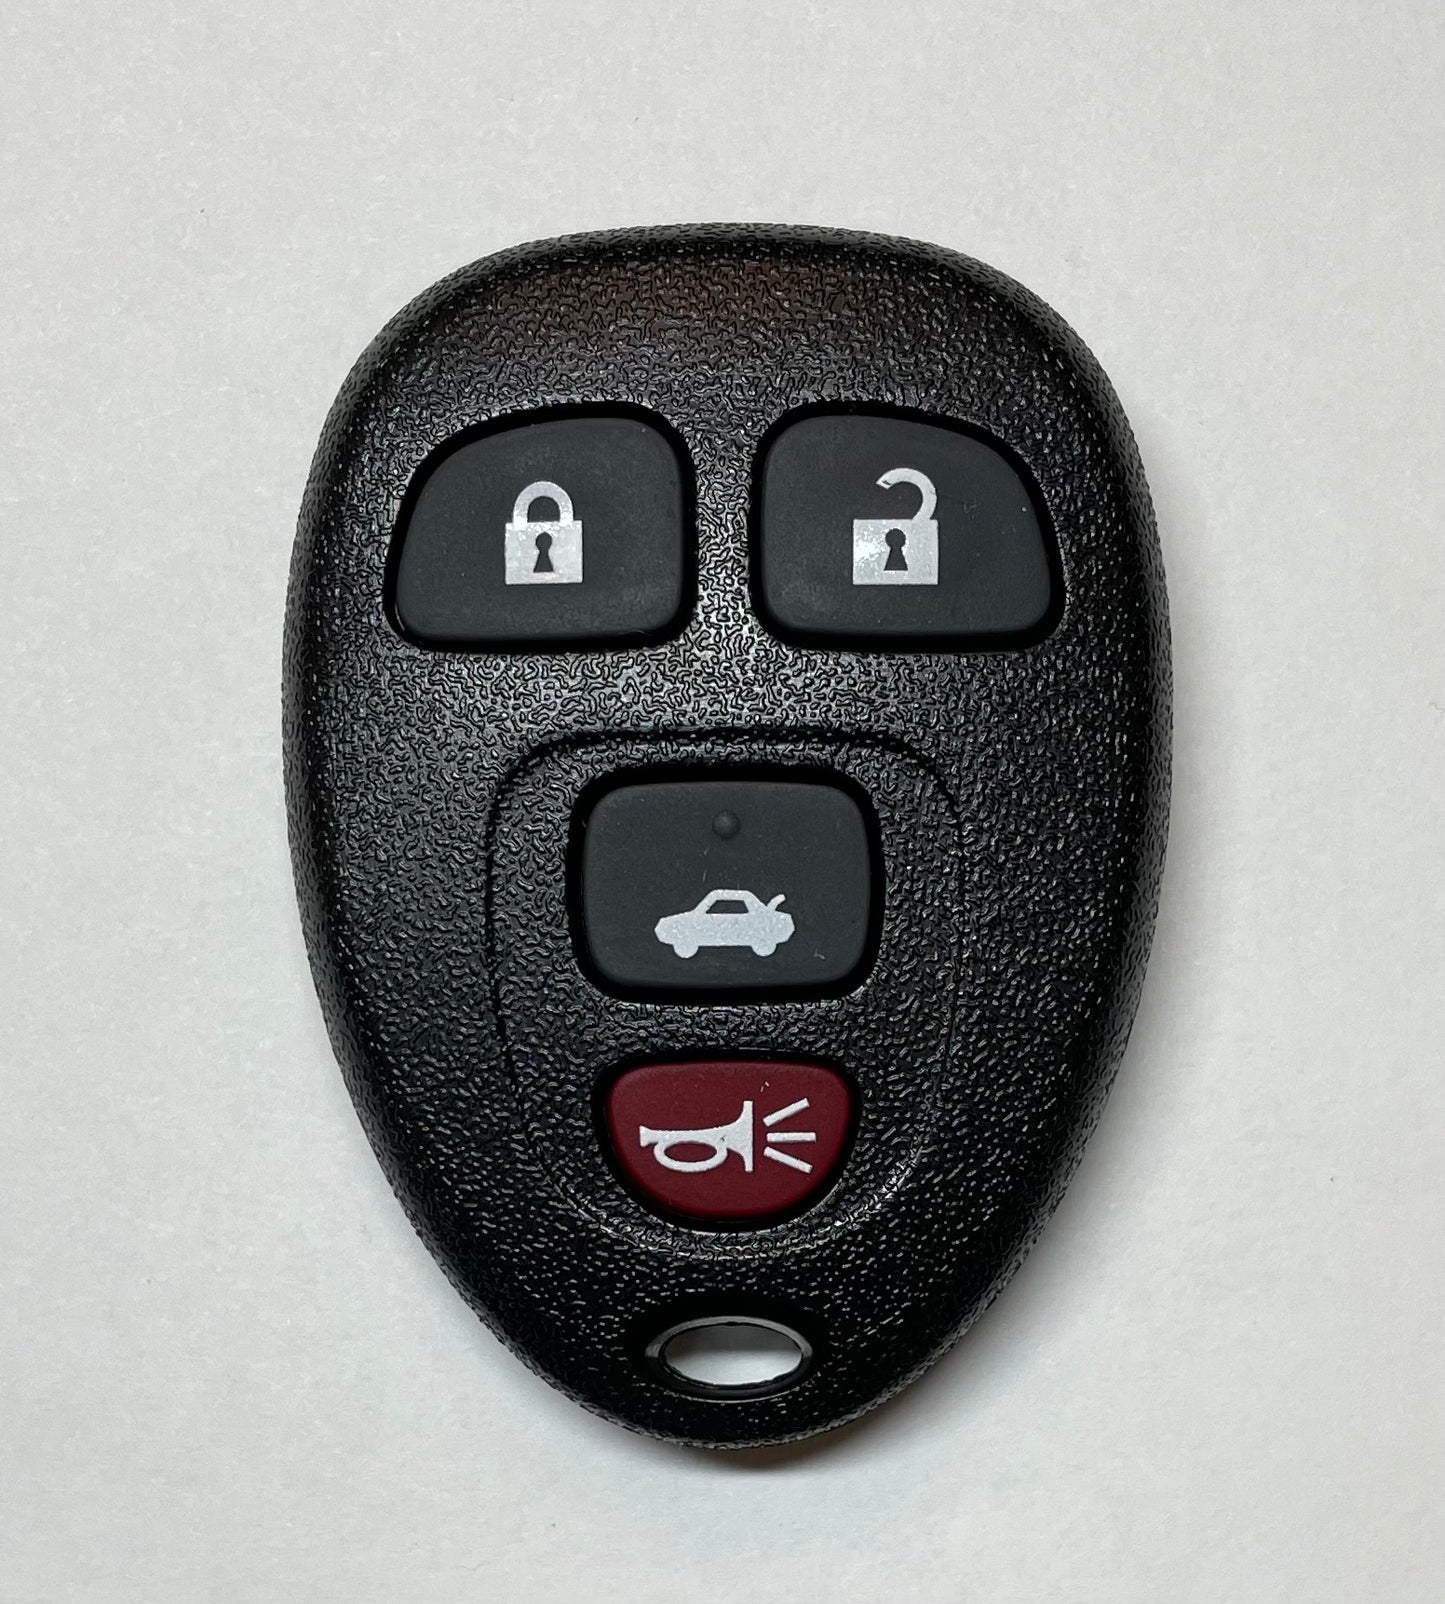 GM - Buick, Cadillac, Chevrolet 2006-2016 - 4-Button Keyless Entry Remote -  FCC ID: OUC60270 - 315 MHz (AFTERMARKET) - SKU: R-G-859